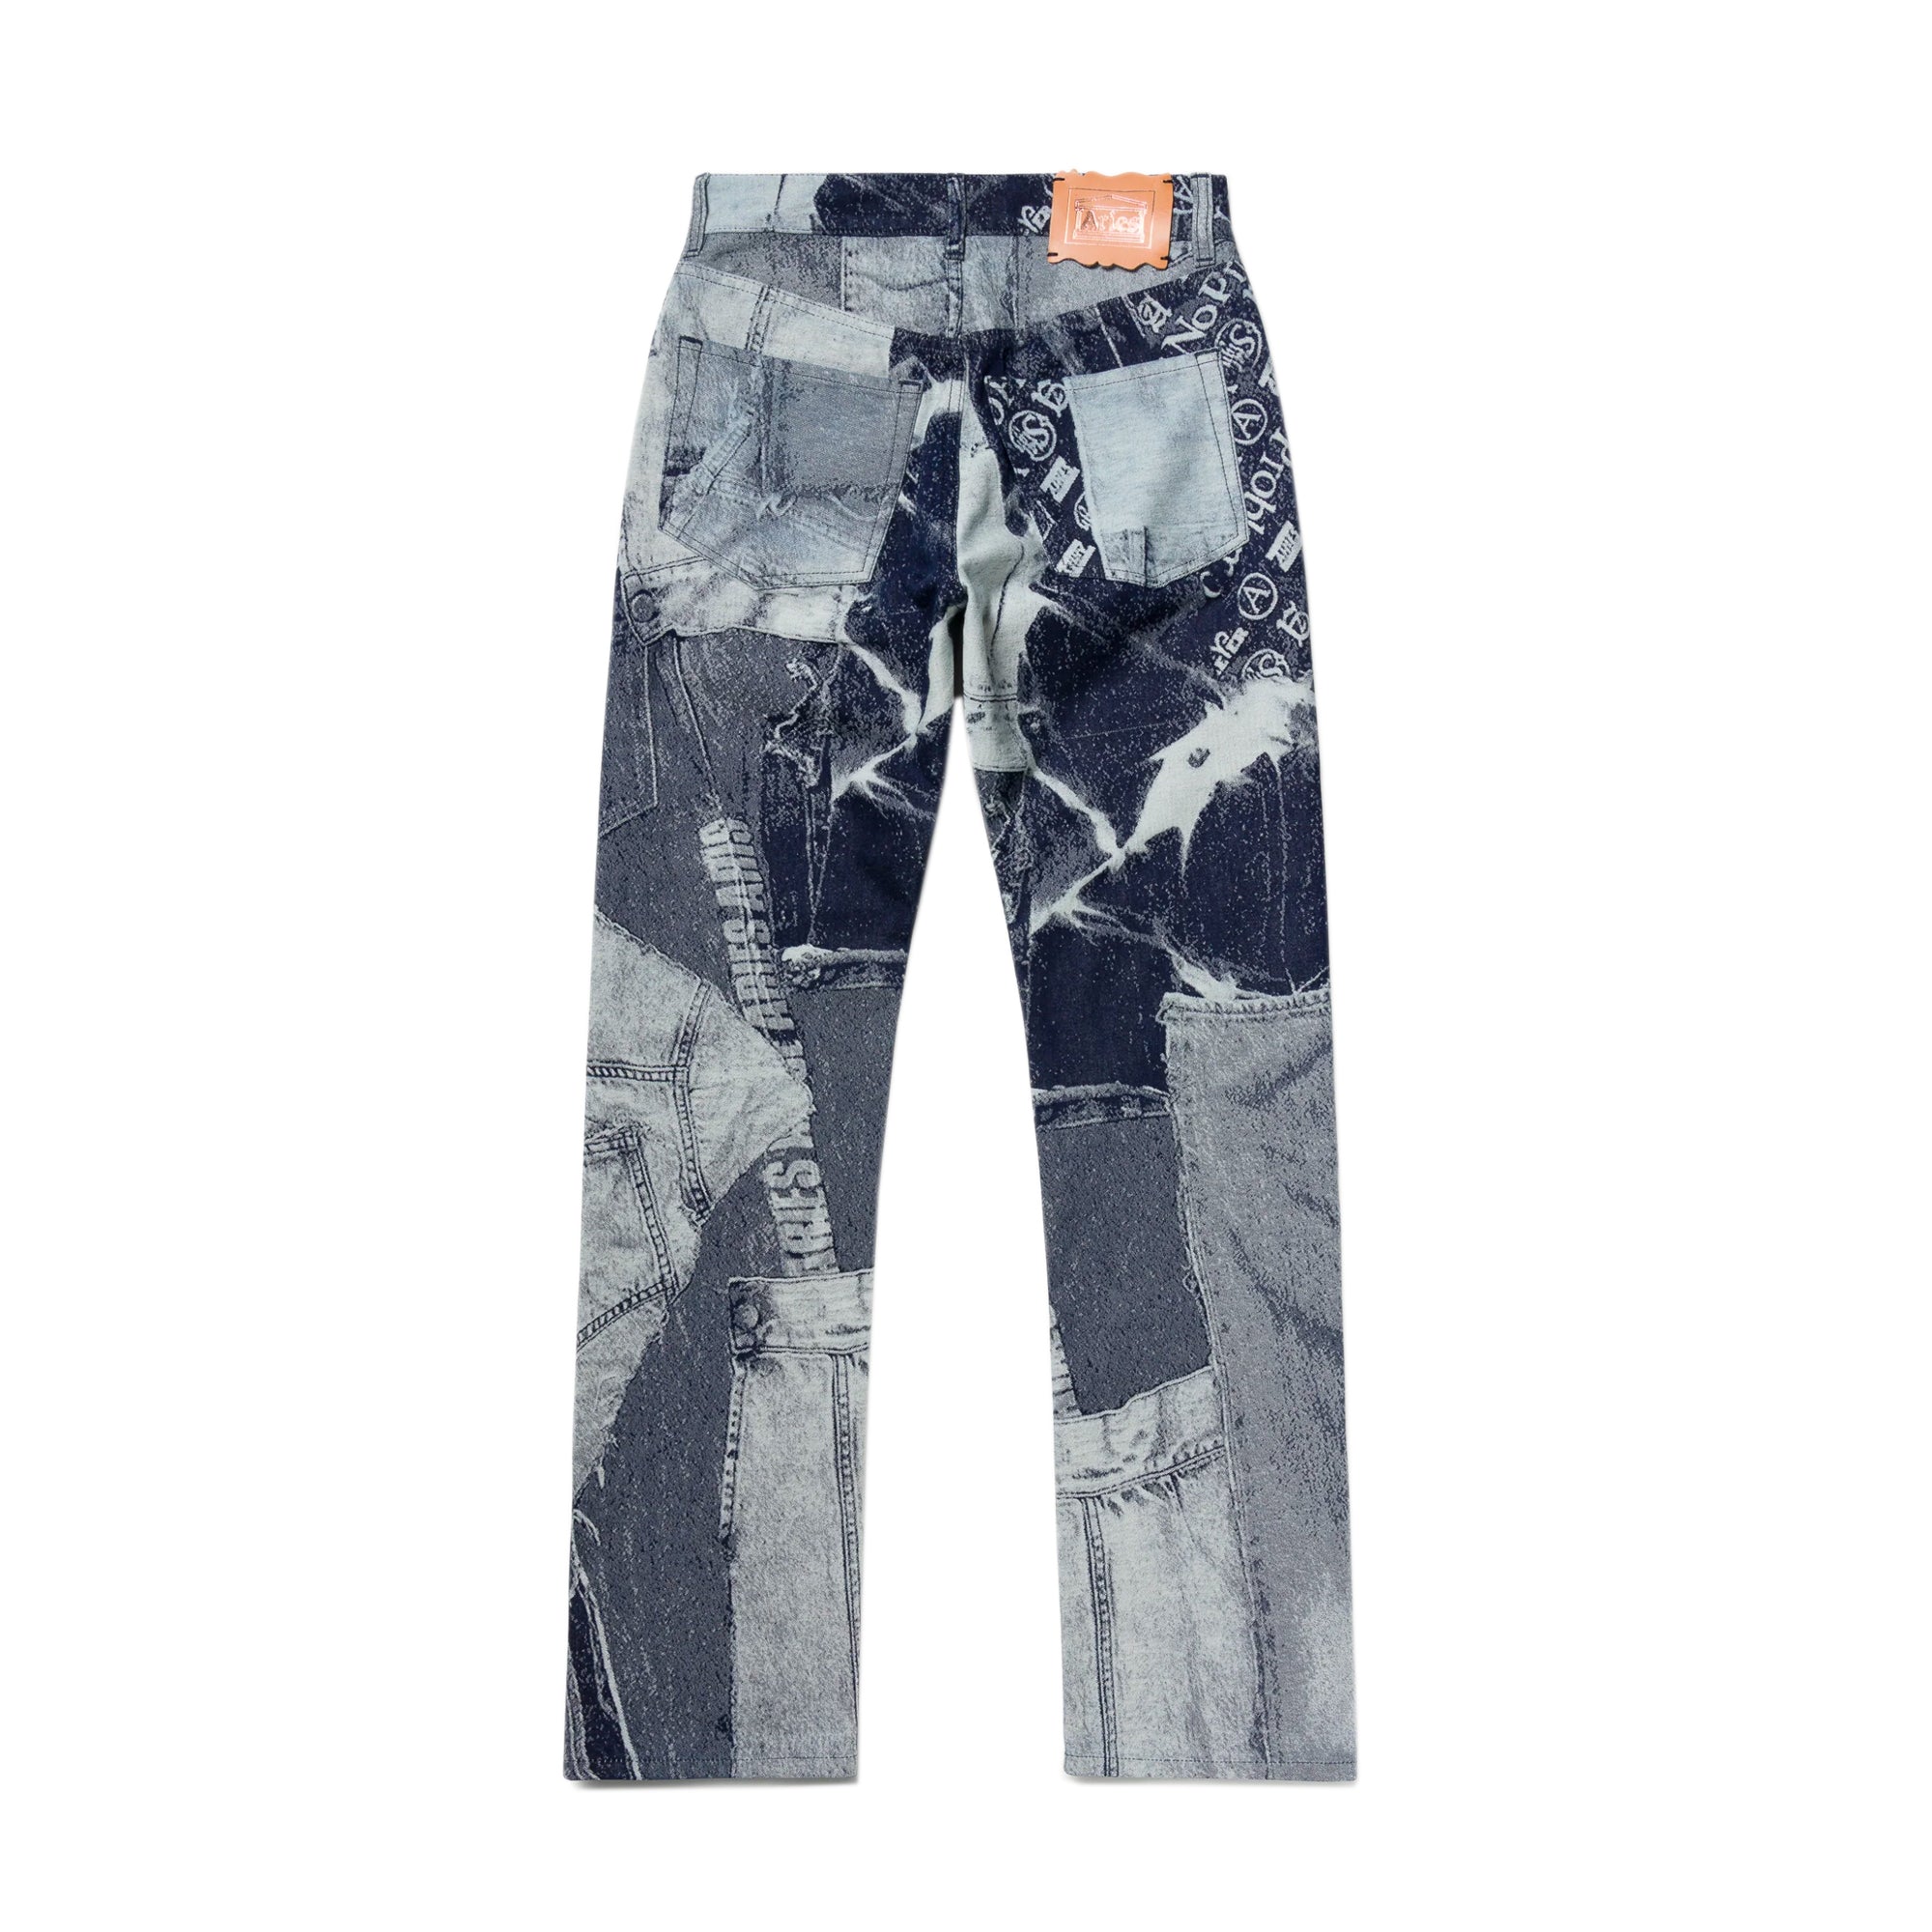 Aries Mens Jacquard Patchwork Lilly Jeans 36